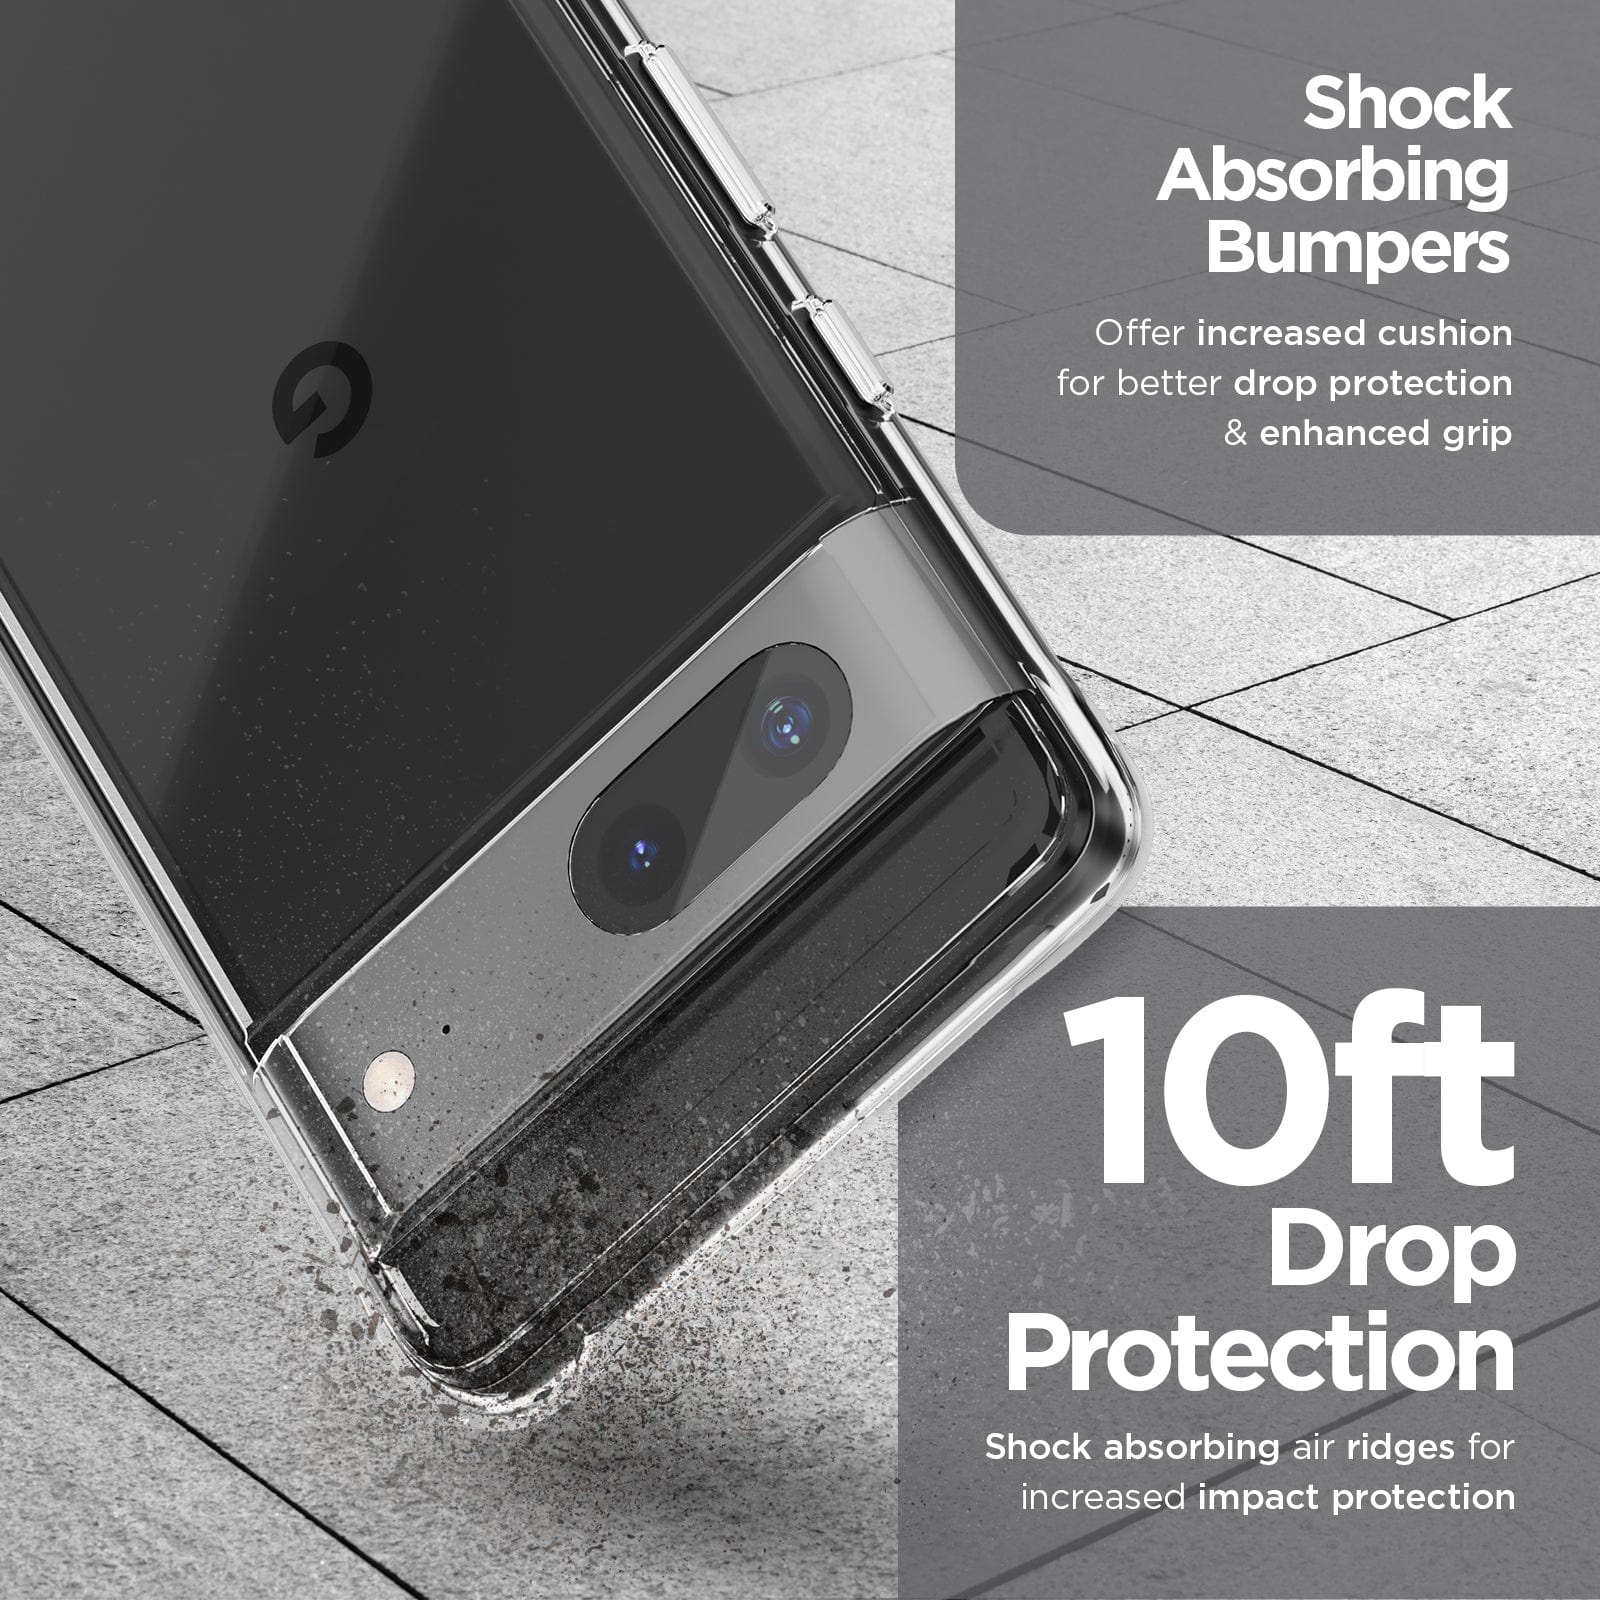 Shock Absorbing bumpers offer increased cushion for better drop protection and enhanced grip. 10ft Drop Protection - shock absorbing ridges for increased impact protection.